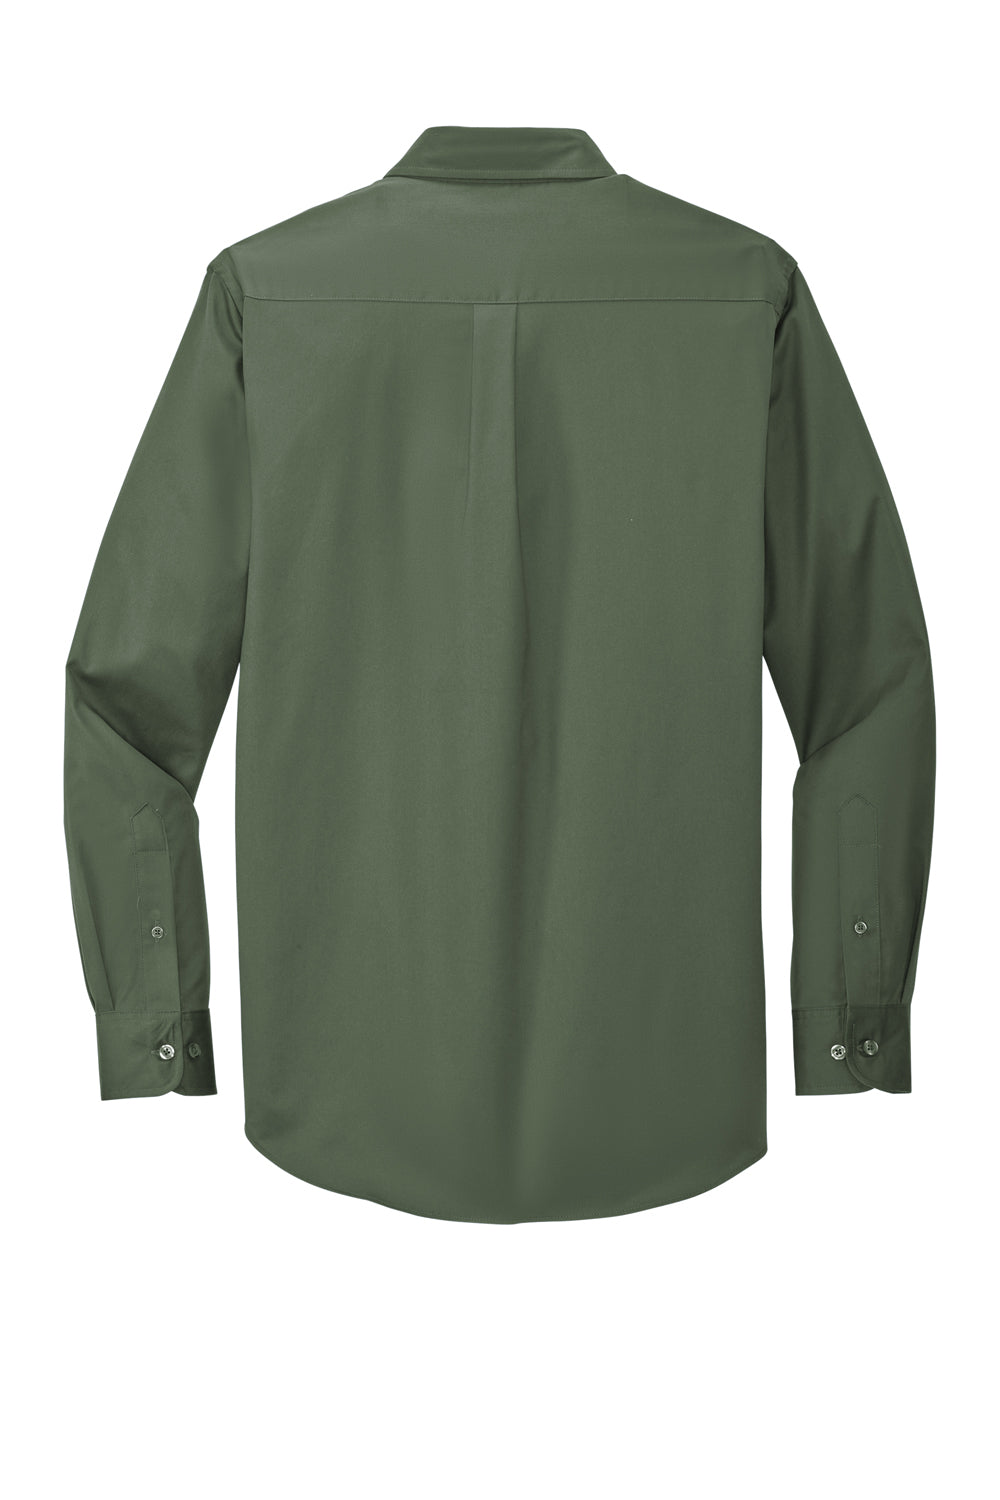 Port Authority S608/TLS608/S608ES Mens Easy Care Wrinkle Resistant Long Sleeve Button Down Shirt w/ Pocket Clover Green Flat Back